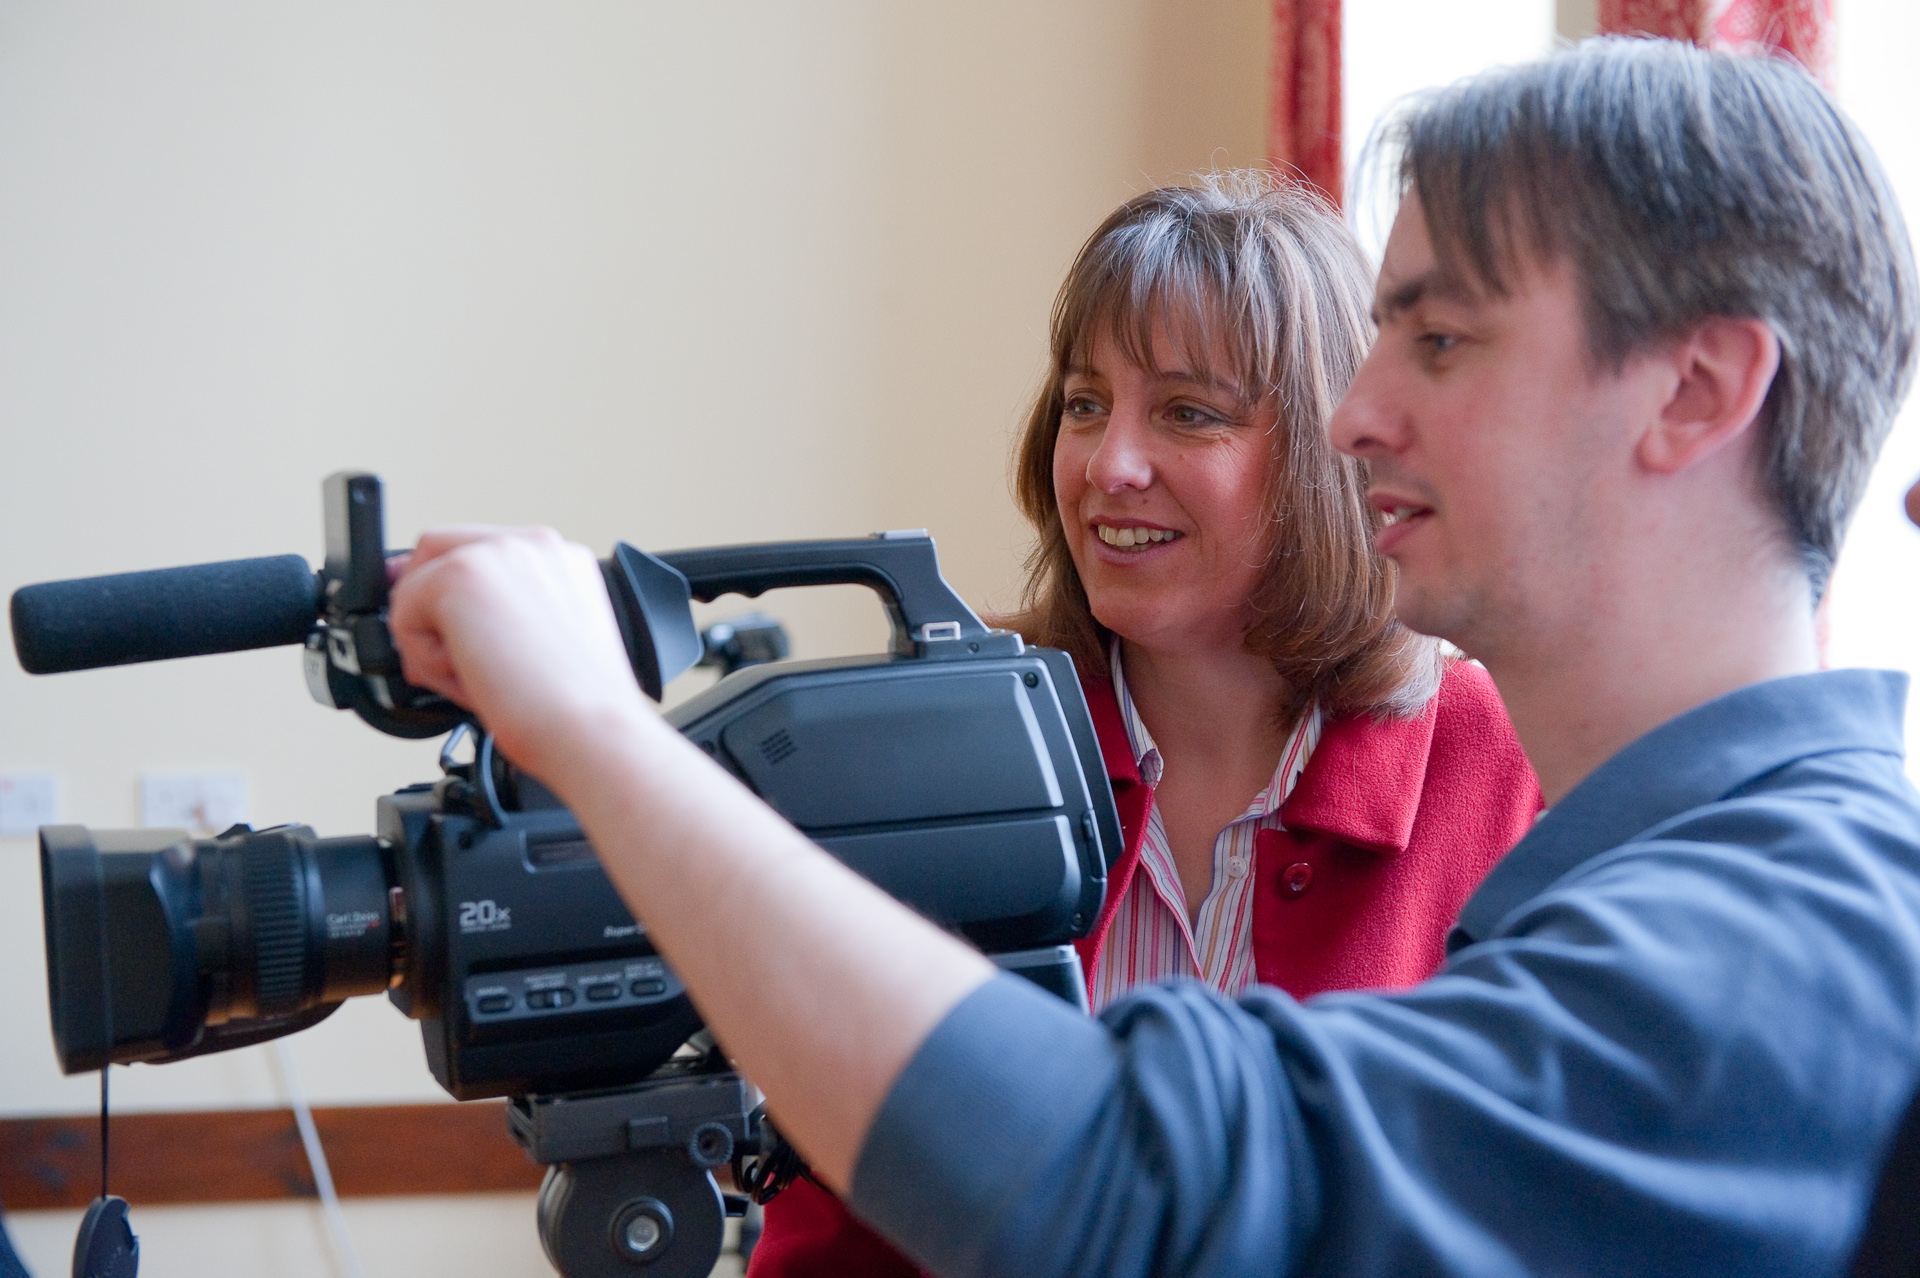 Video Producer, Mark and Client